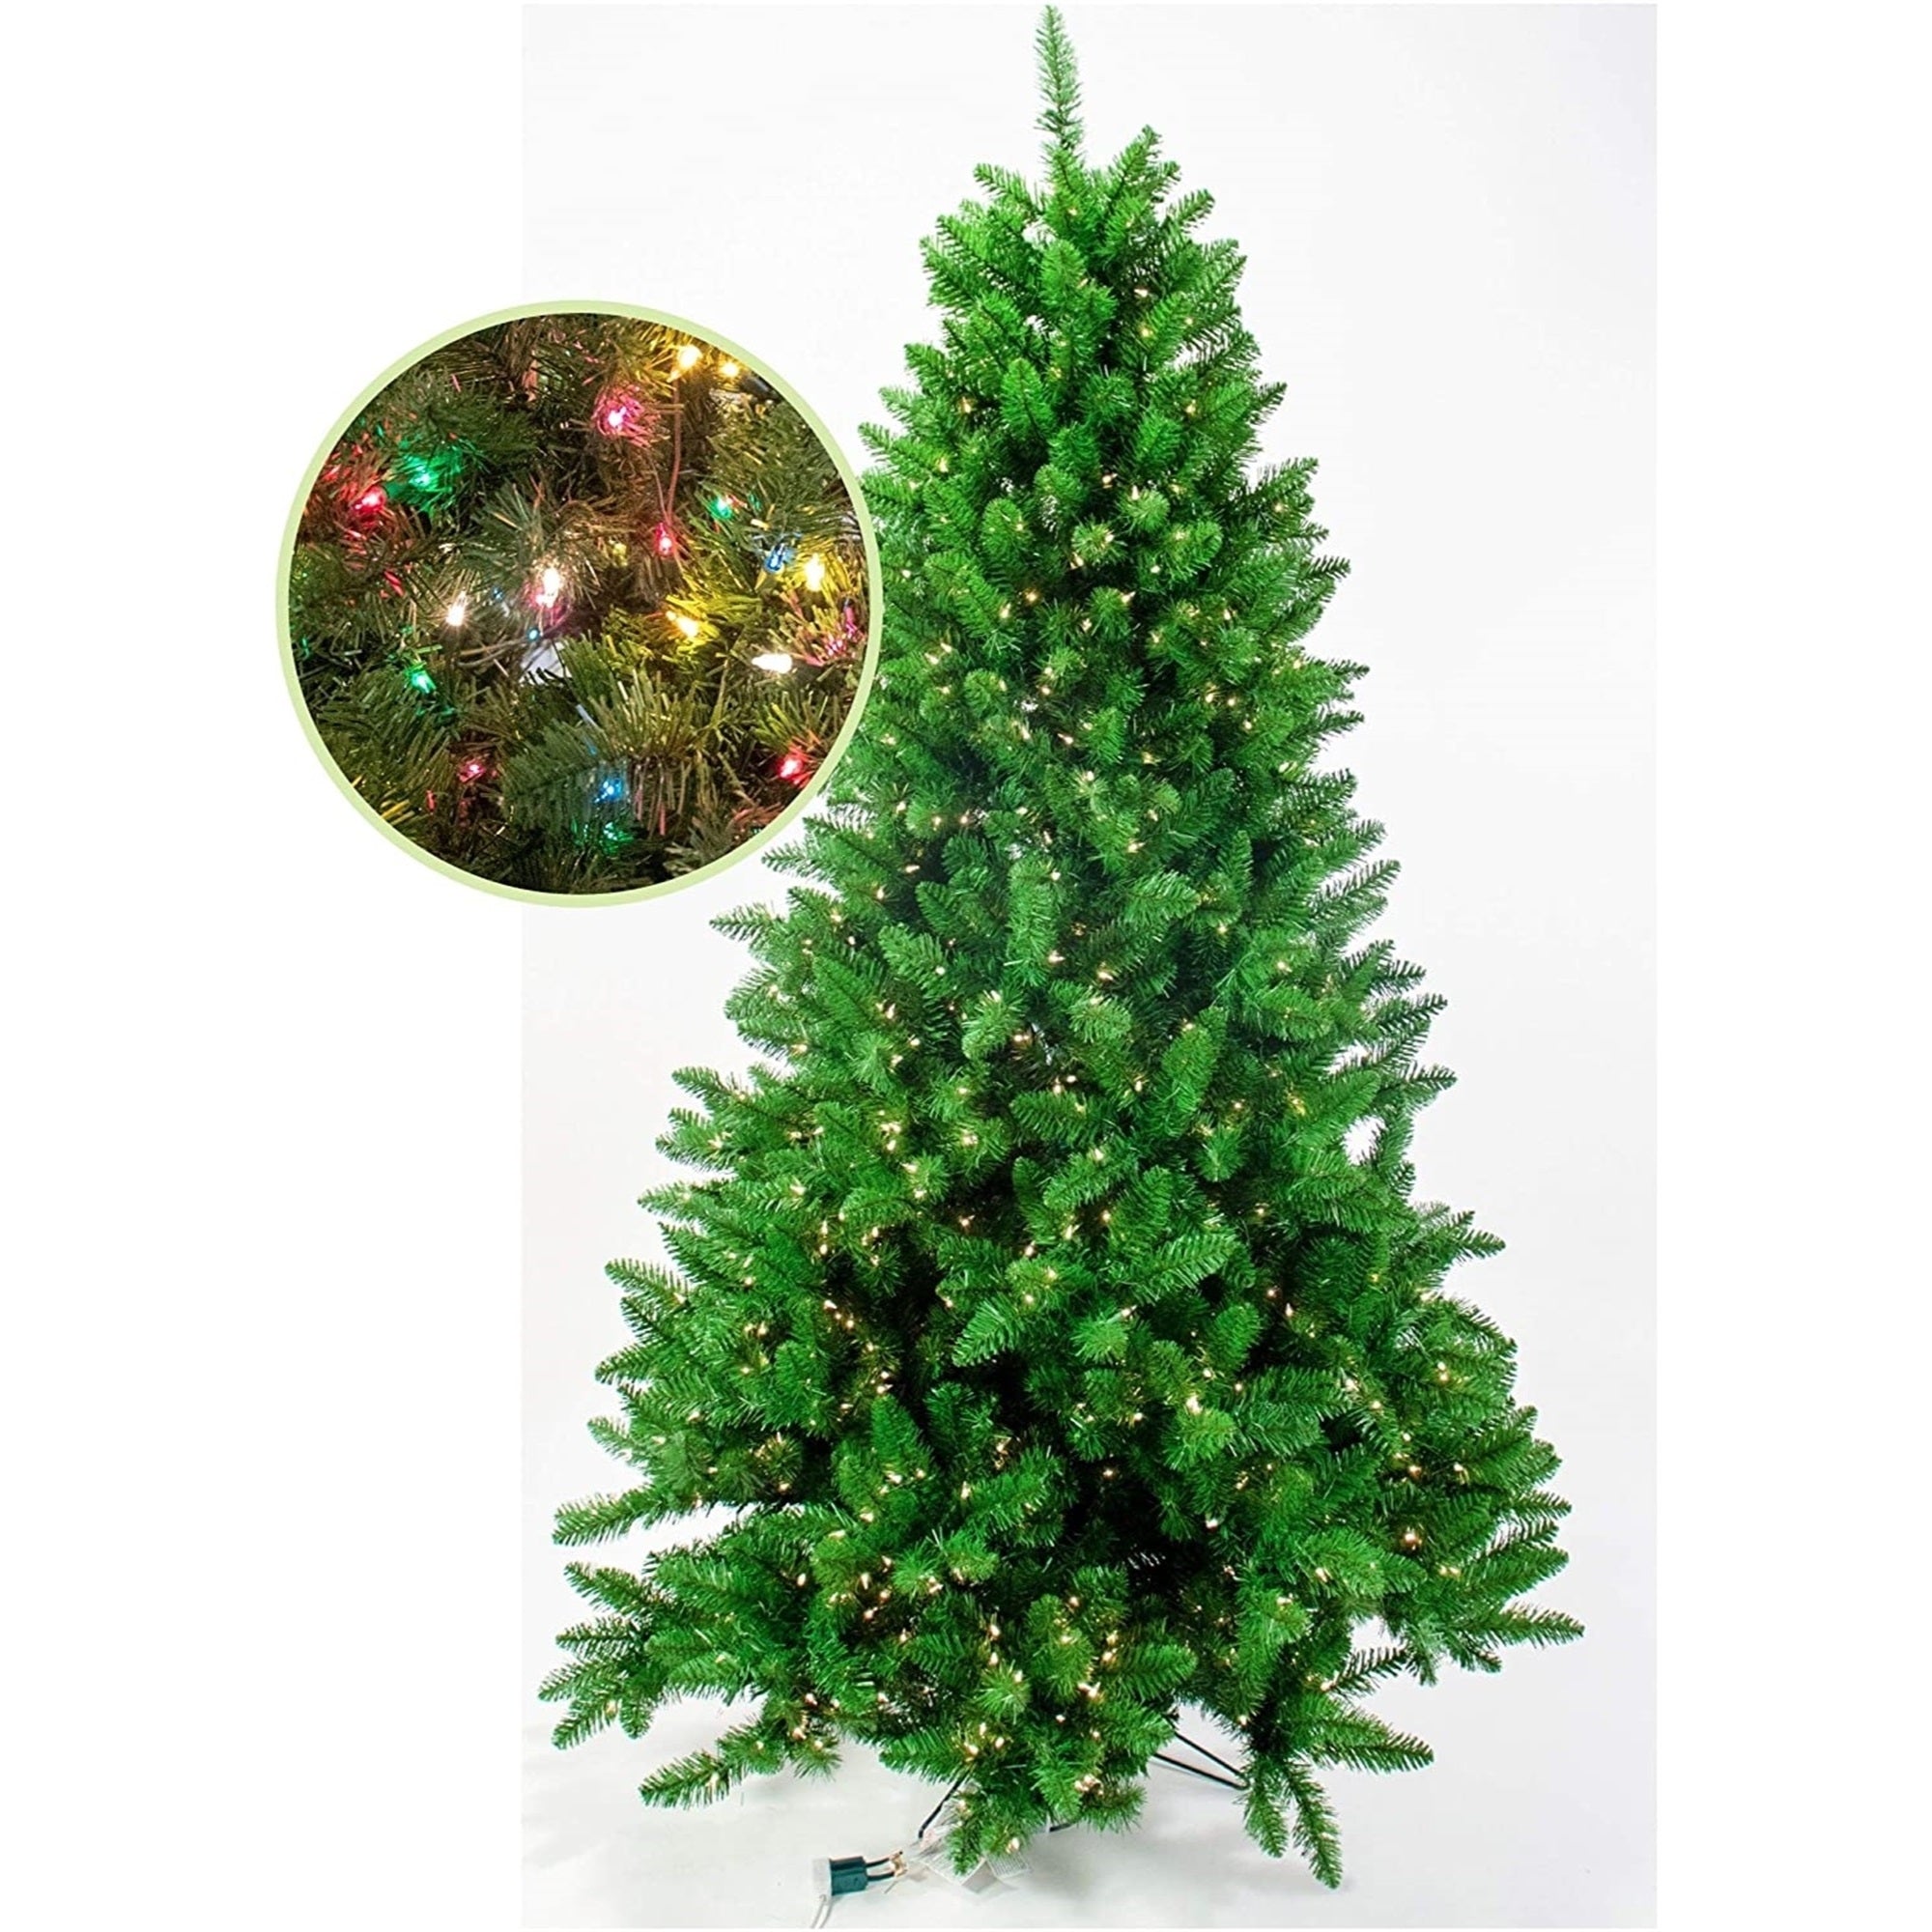 Garden Elements Artificial Pre-Lit Penn Spruce Christmas Tree, 1532 Tips, 1200 Multi-Colored Lights, 7.5 ft